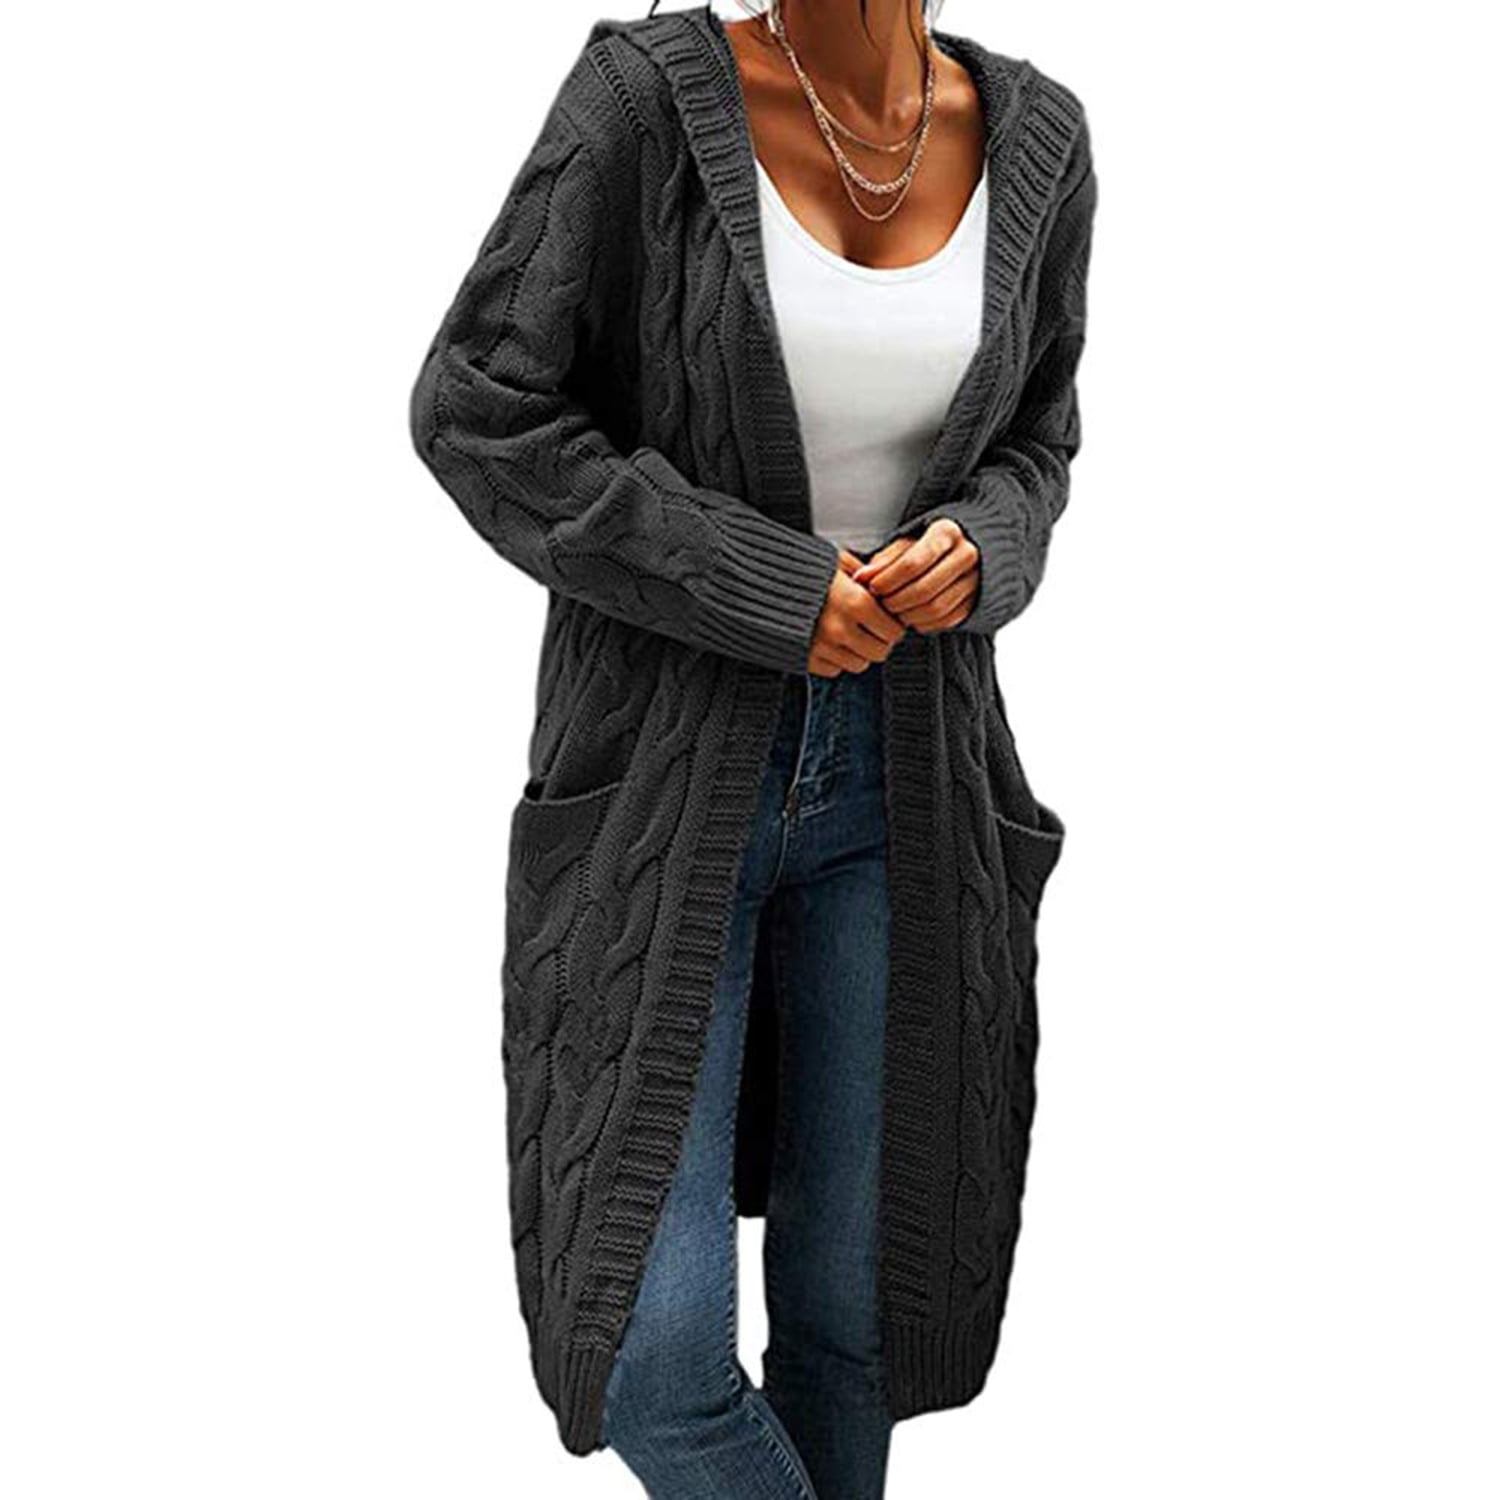 Delou Women's Hooded Cardigan Knit Sweater Solid Thick Long Sweater ...